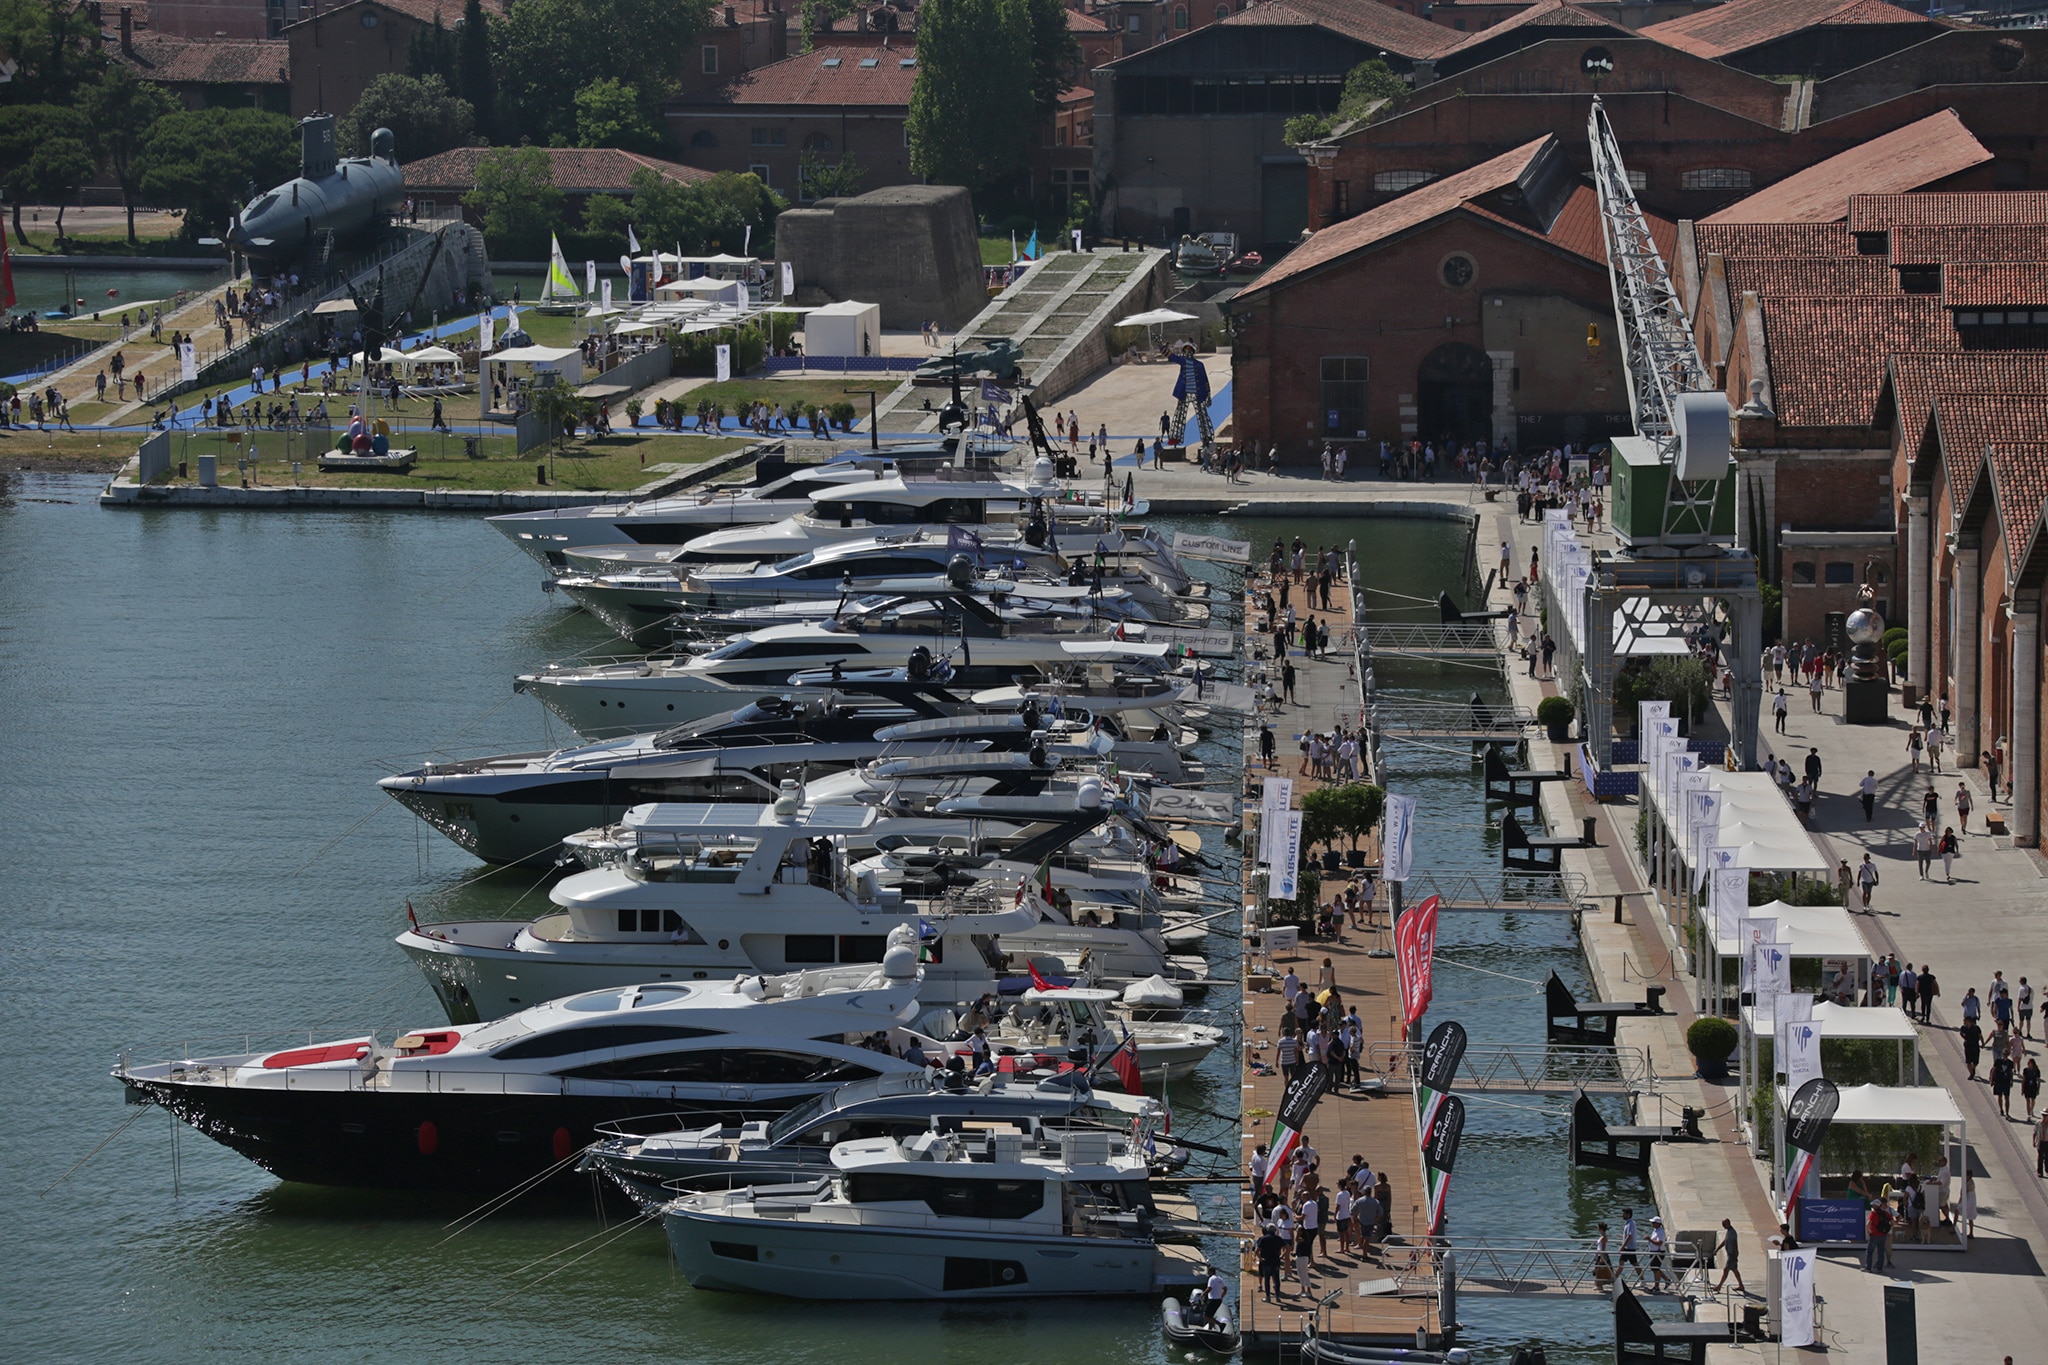 Venice Boat Show to feature electric boat regatta - Marine Industry News